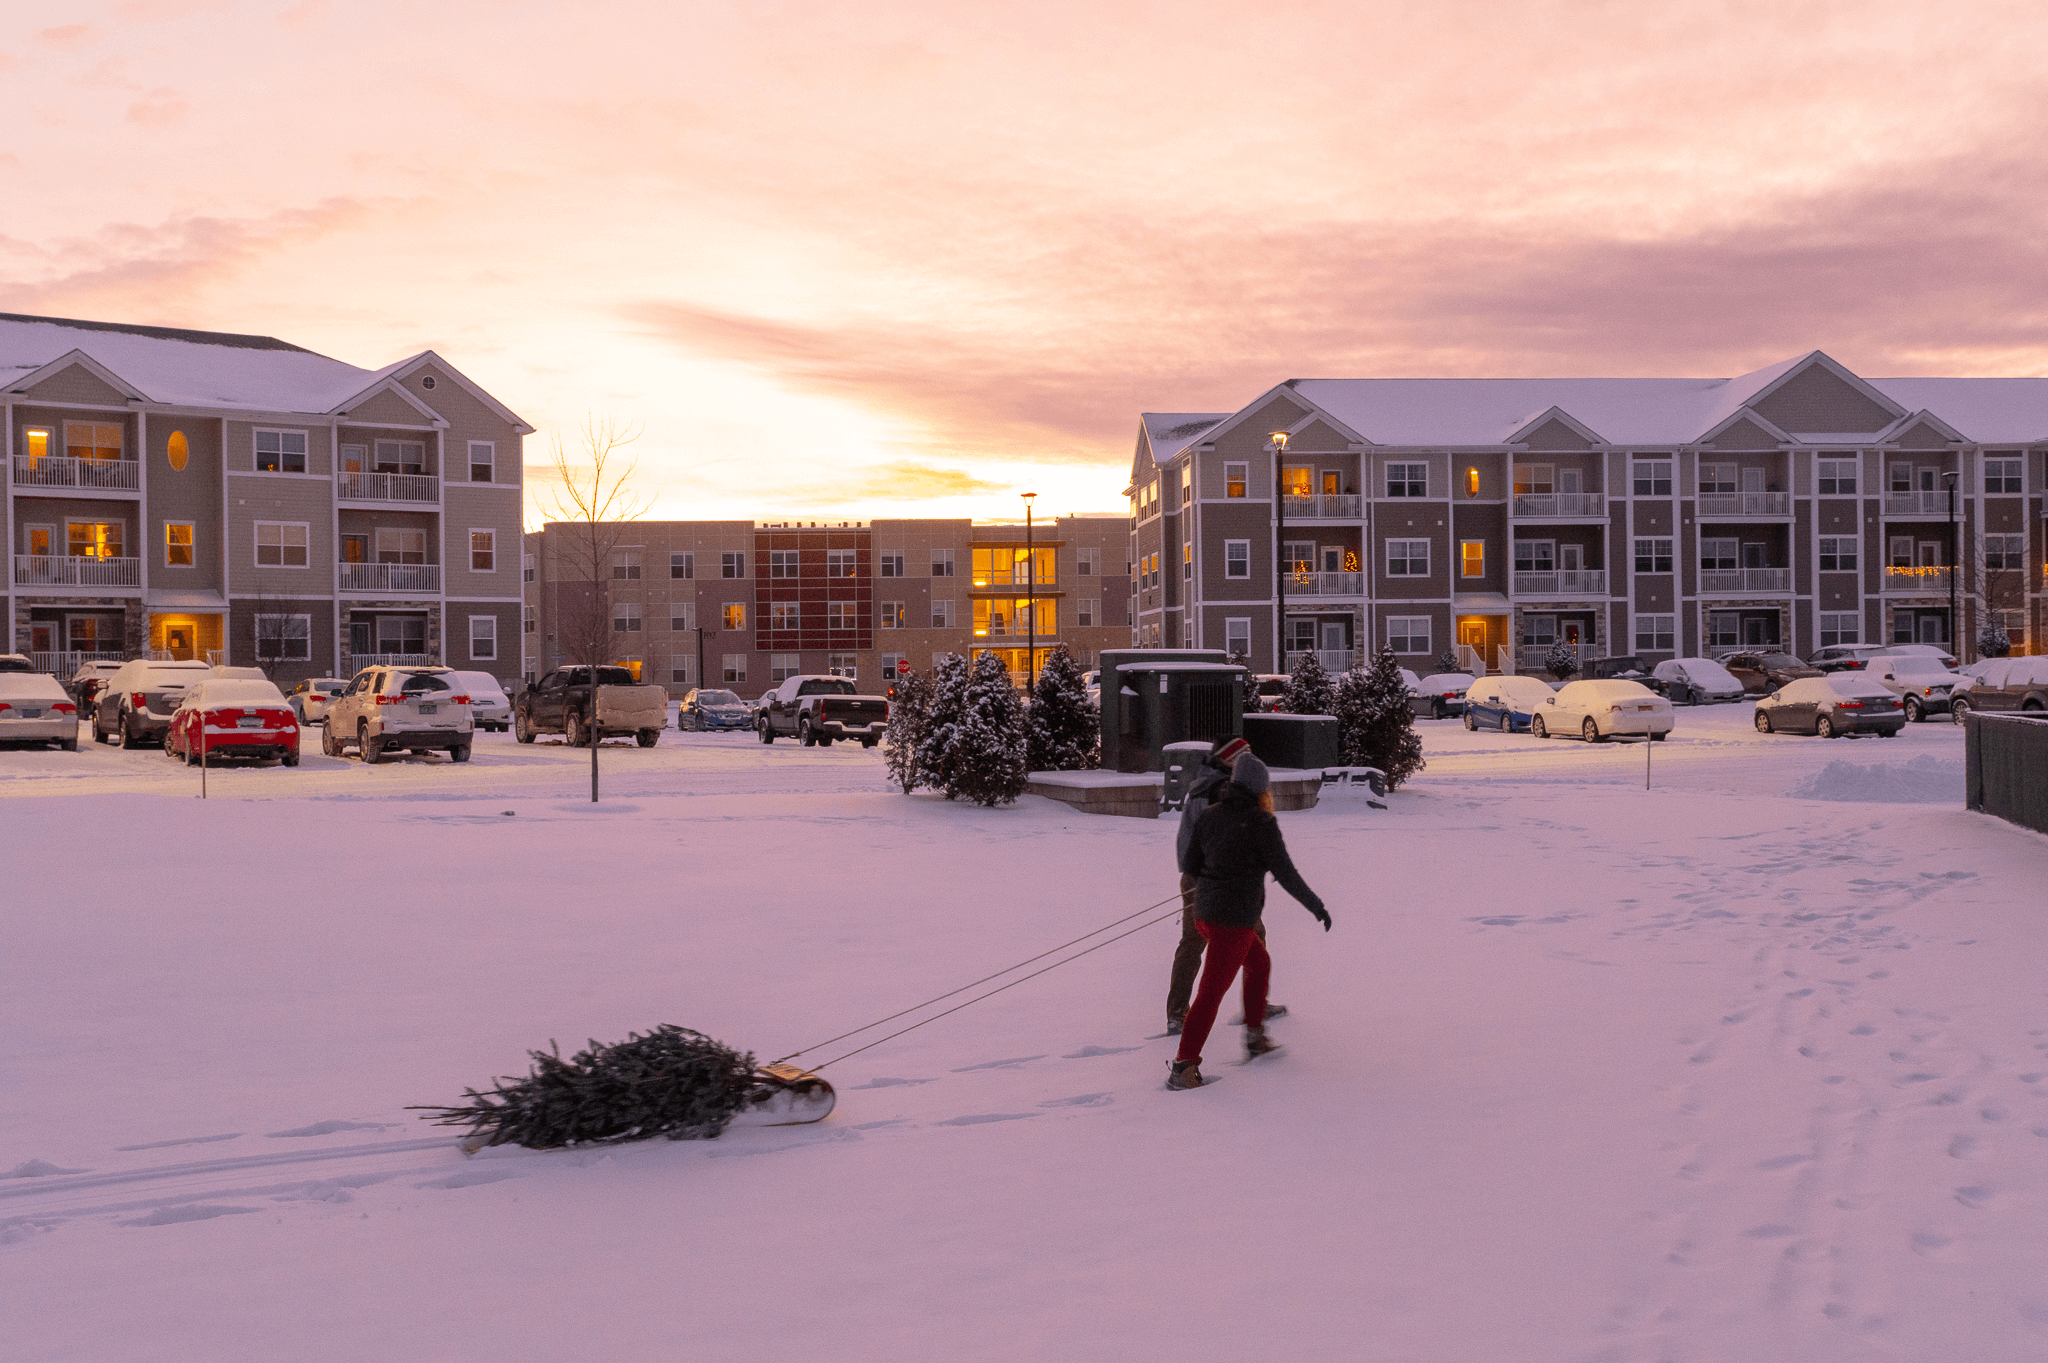 Two peoples pulling a Christmas Tree in the snow with Finney Crossing Apartments in the background.